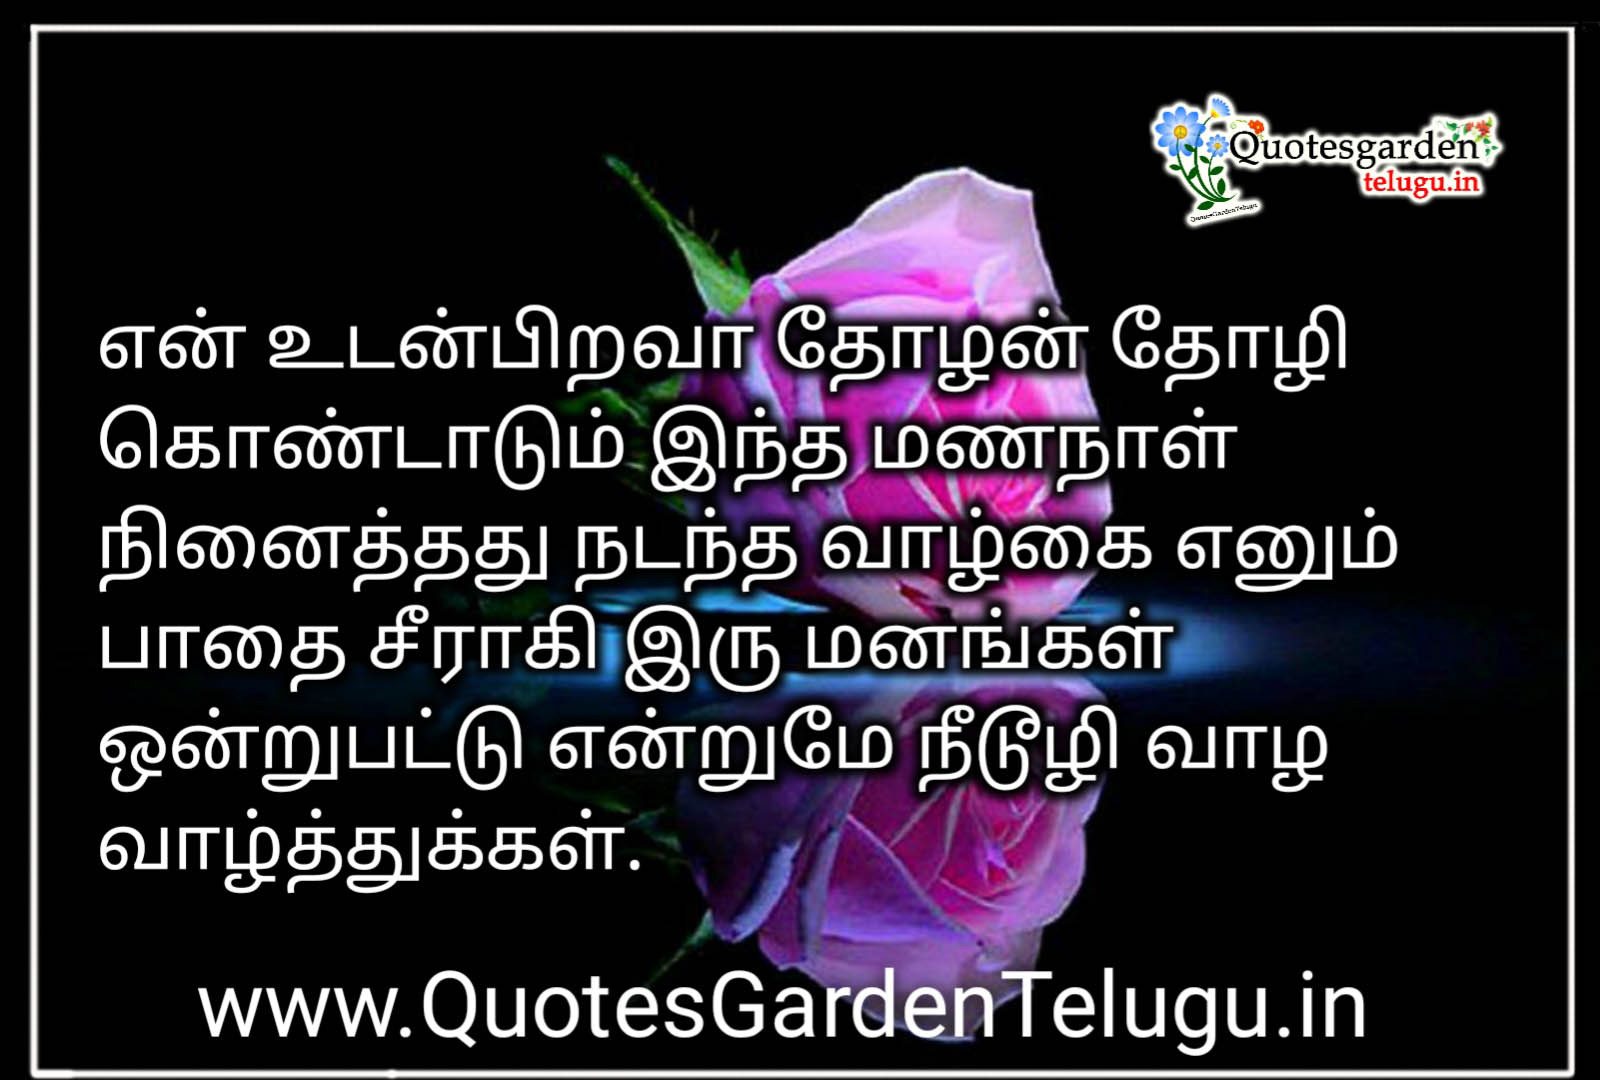 Cute Father Birthday Greetings in Tamil HD Wallpapers Top Tamil Kavithaigal Happy  Birthday Wishes Tamil Quotes for Girls Whatsapp Pictures Free Download |  www.AllQuotesIcon.com | Telugu Quotes | Tamil Quotes | Hindi